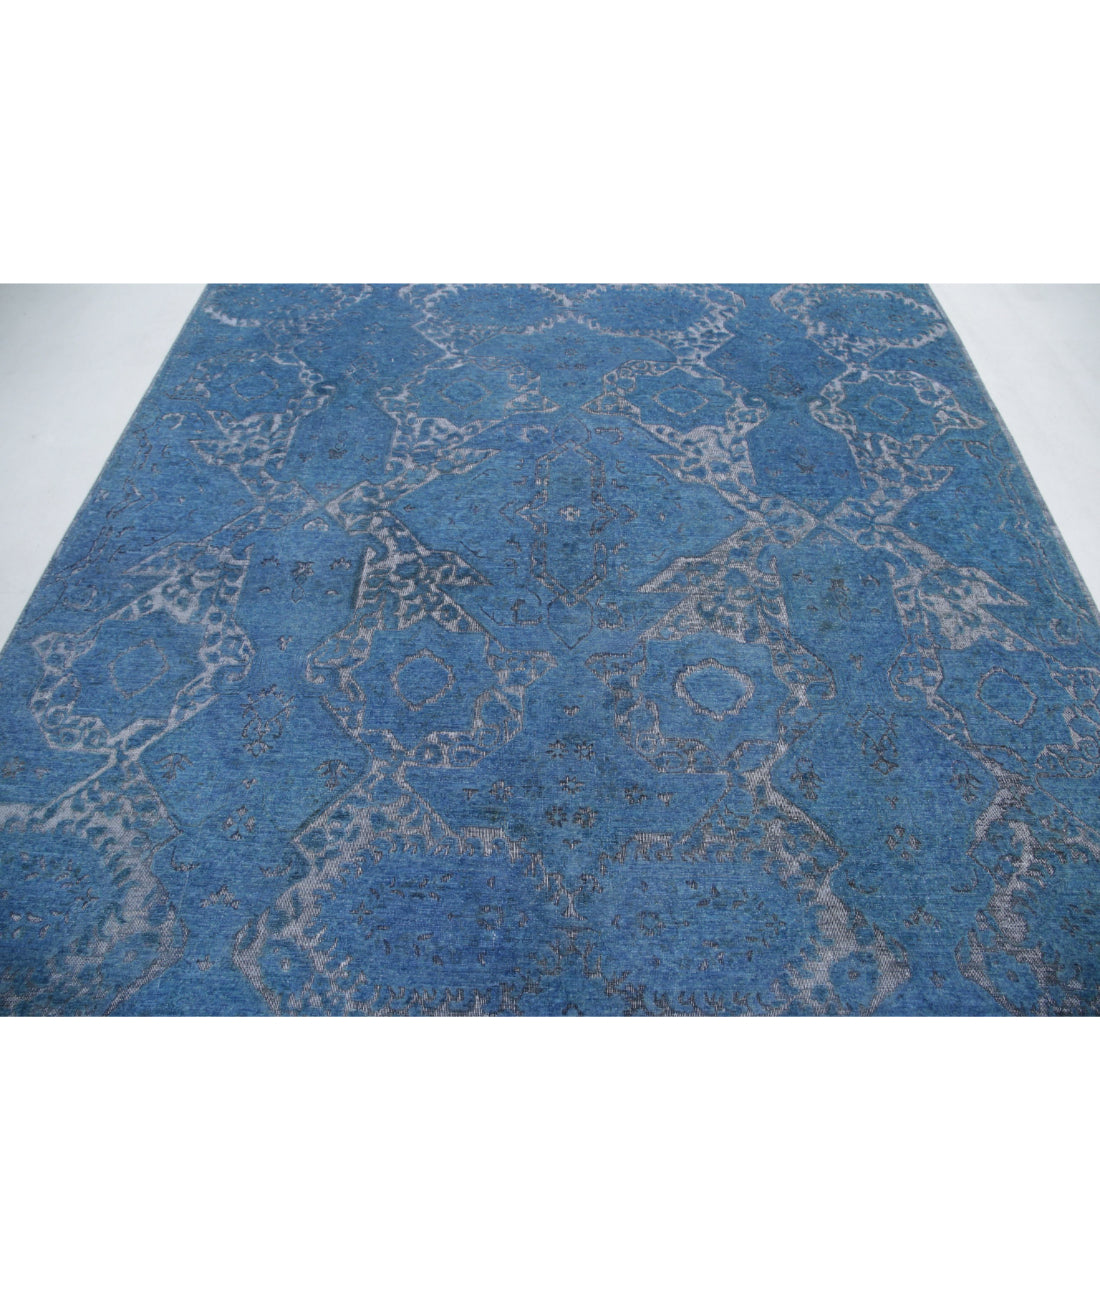 Hand Knotted Onyx Wool Rug - 7'8'' x 9'5'' 7'8'' x 9'5'' (230 X 283) / Blue / Blue